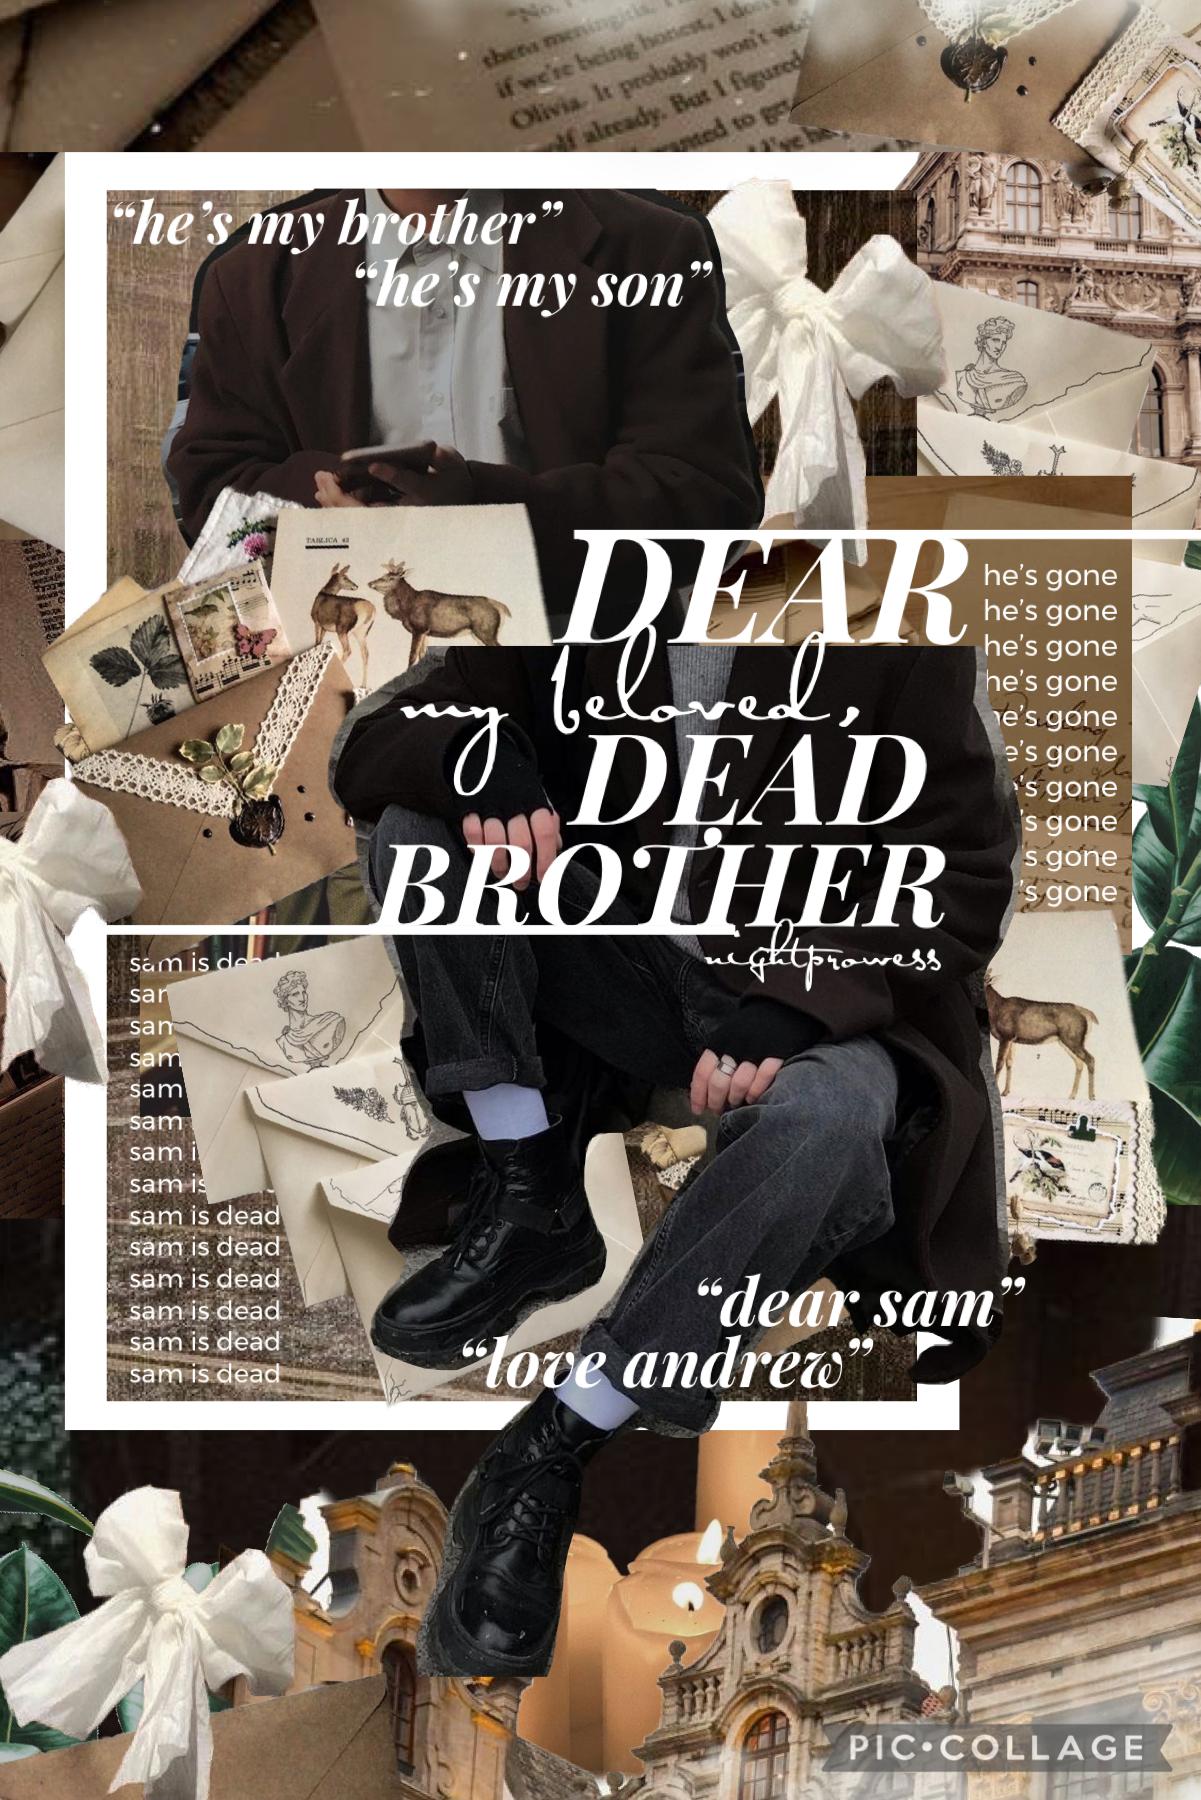 dear my beloved, dead brother | a play by me

@remixes